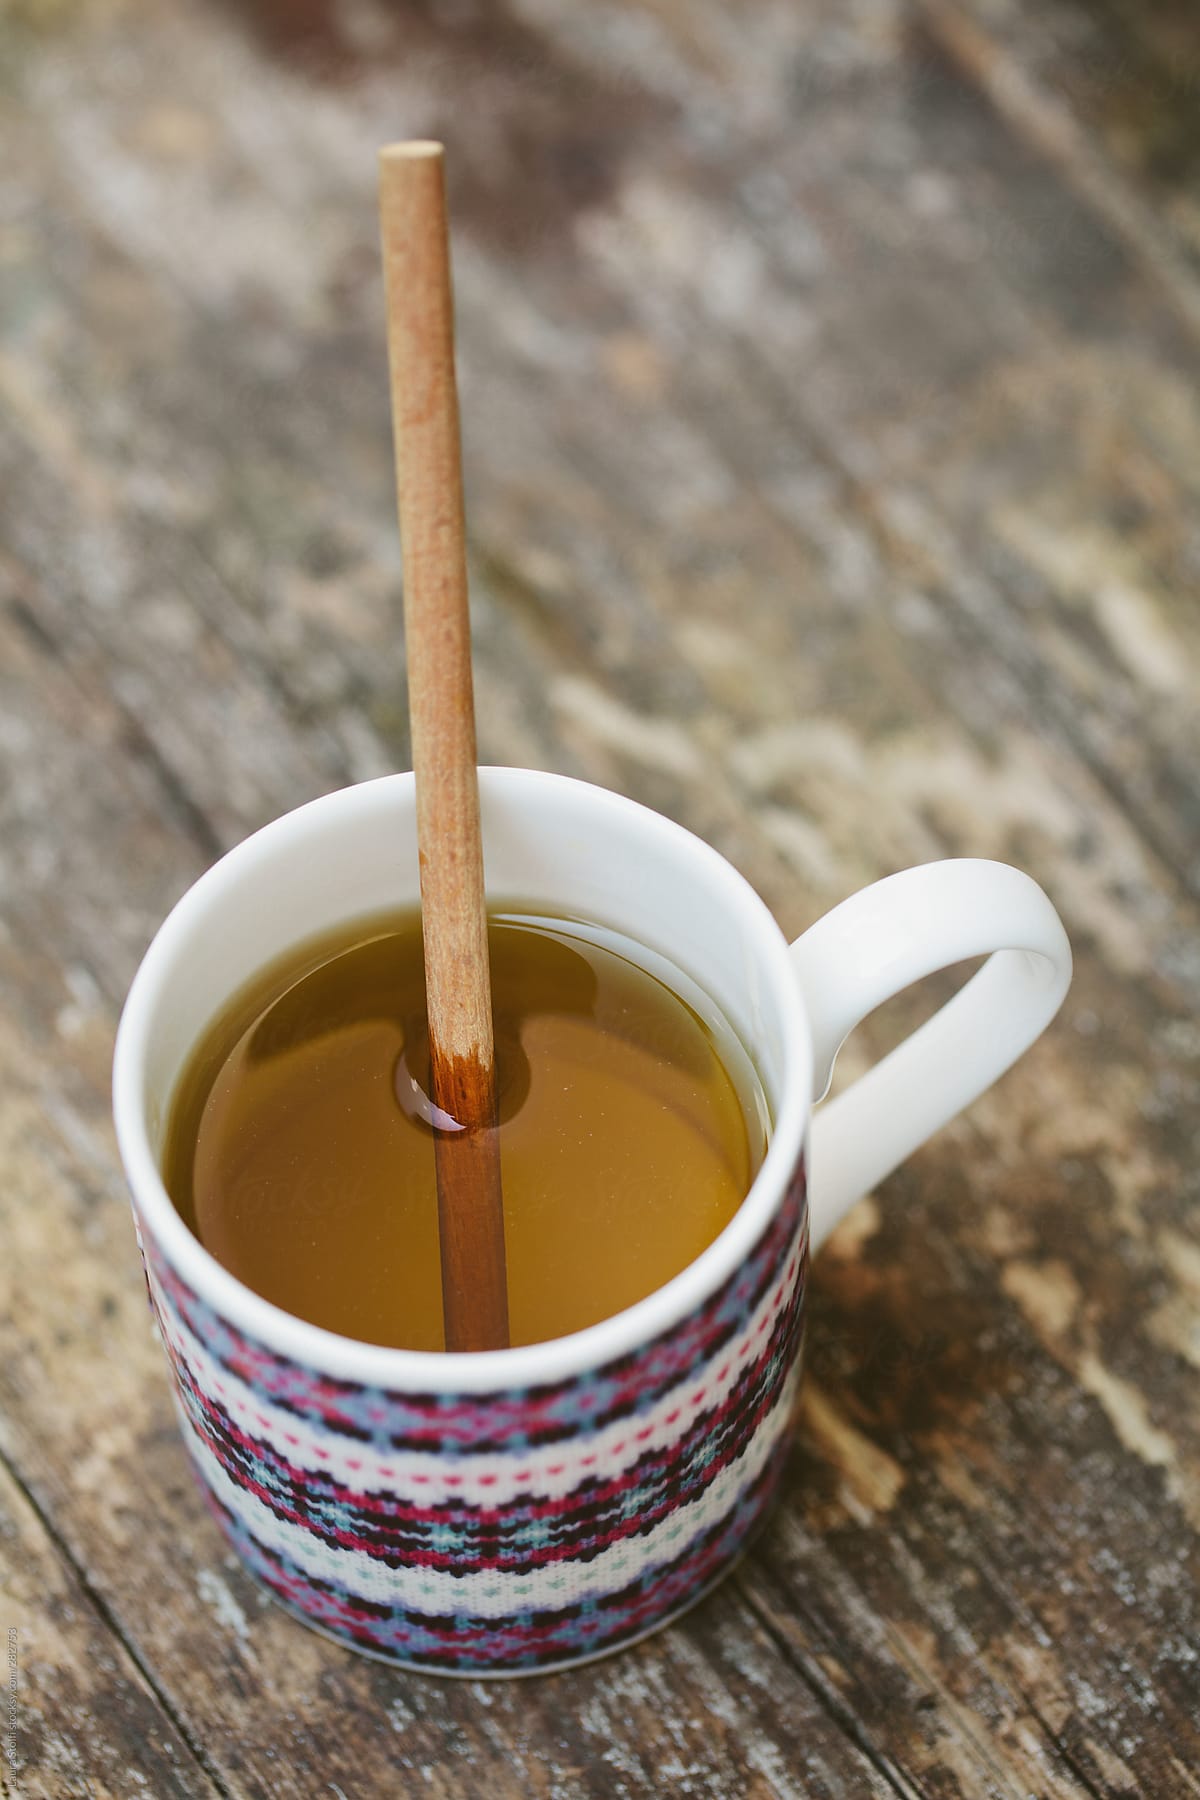 Overhead shot of tea in fine china mug with wooden poon in it